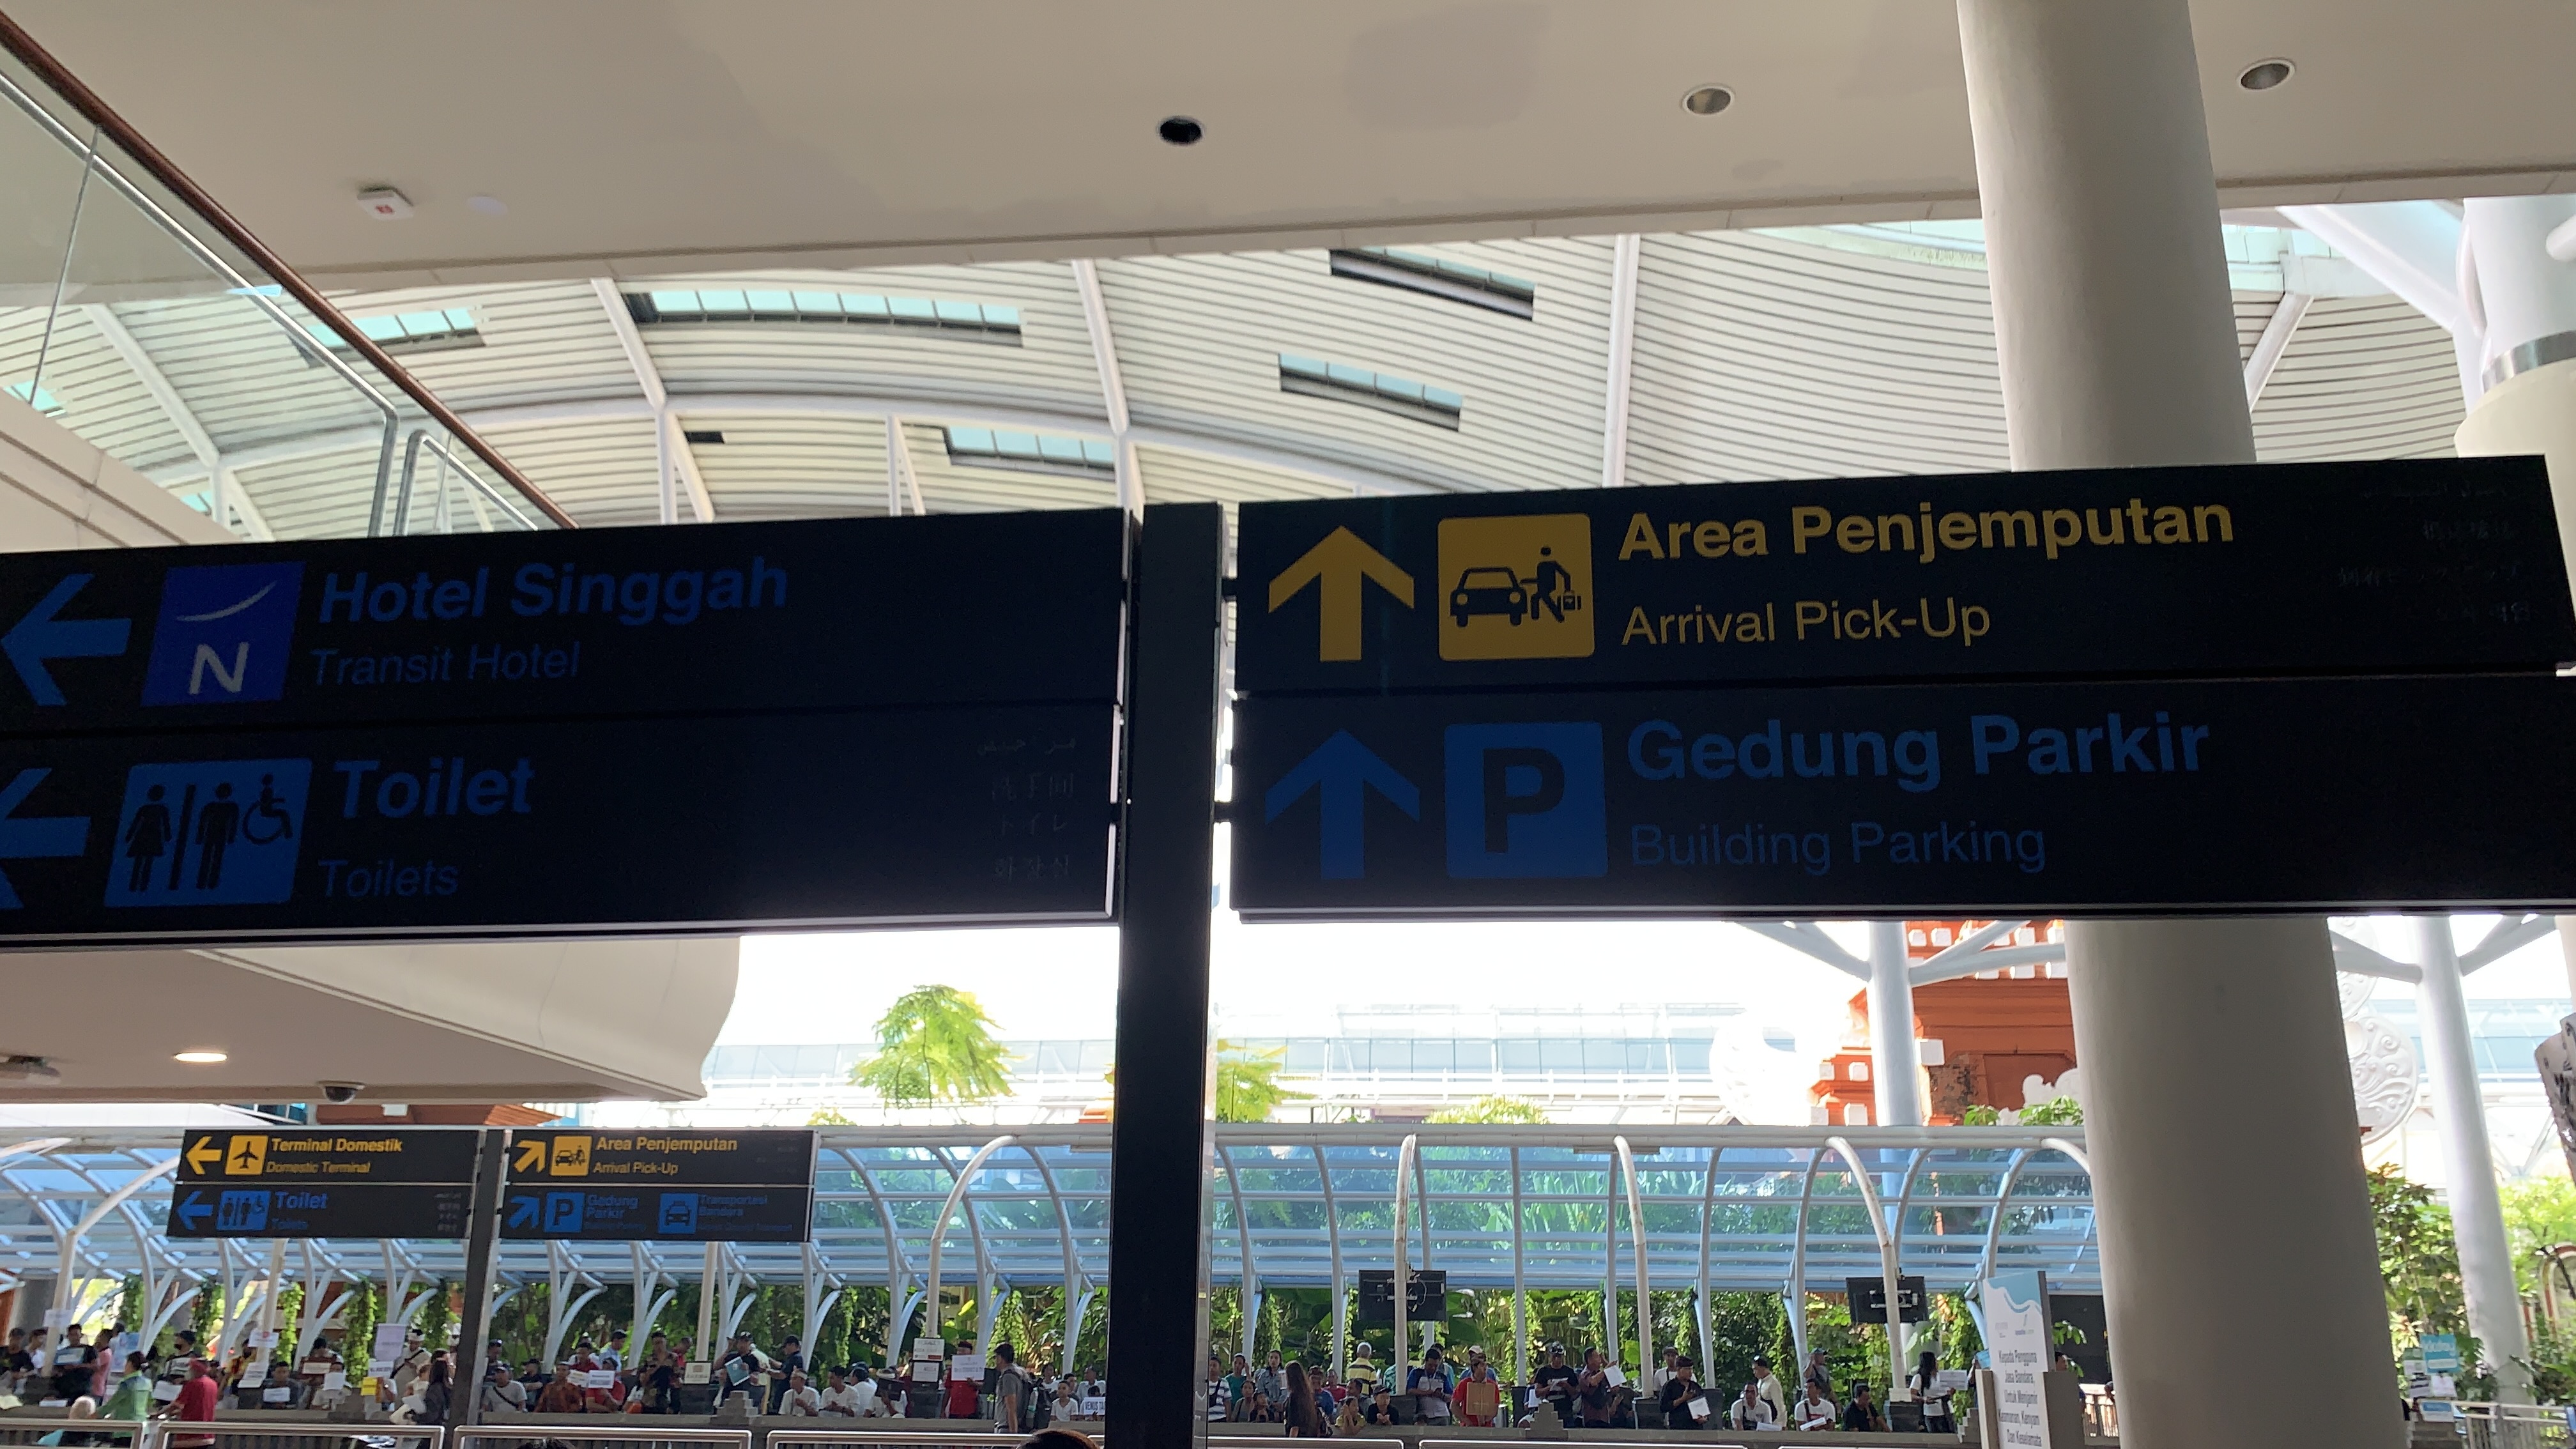 Signage at Bali's Ngurah Rai International Airport indicating directions to Arrival Pick-Up, Building Parking, Transit Hotel, and Toilets